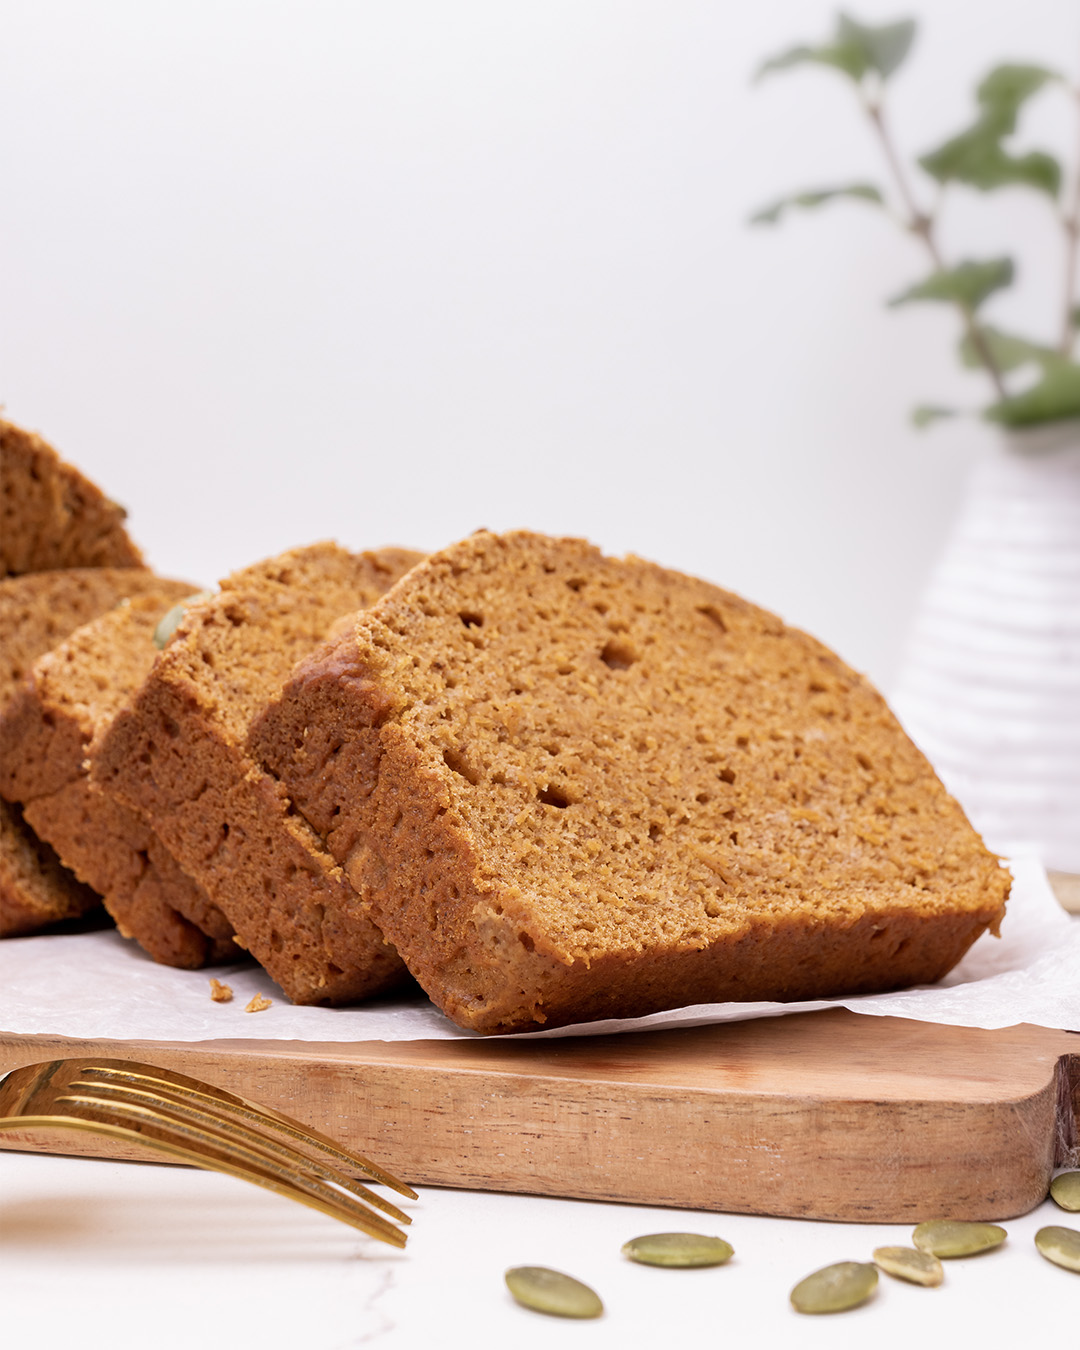 Close up view showing texture of sliced pumpkin bread.